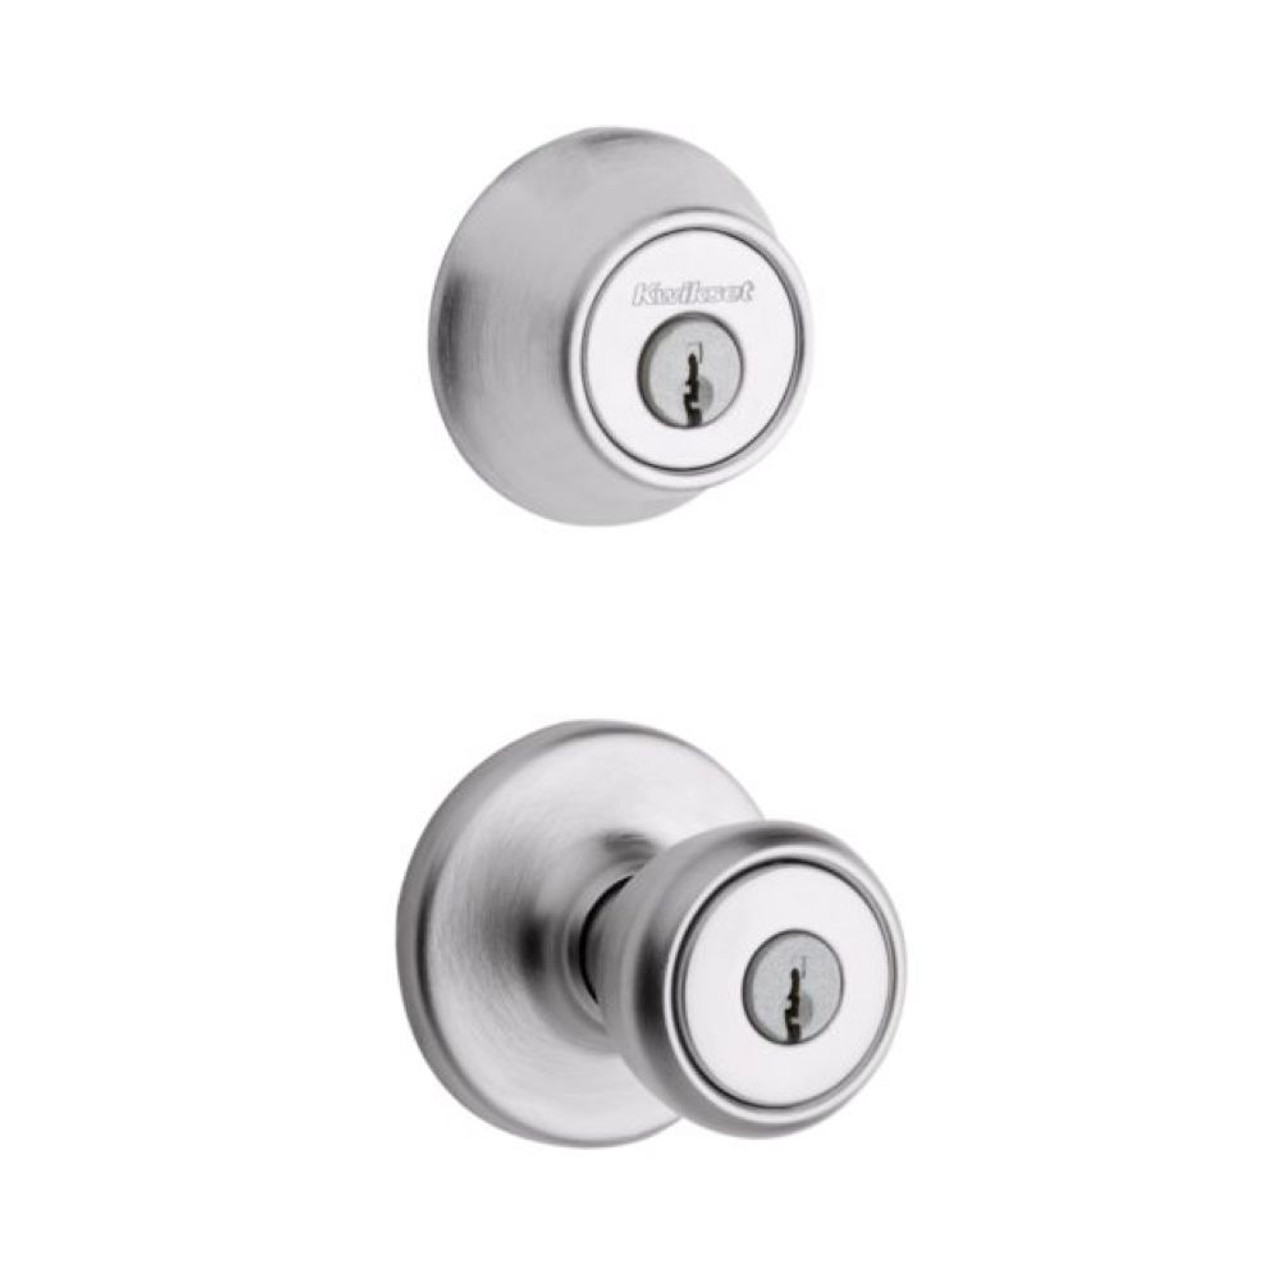 Kwikset 695 Tylo Entry Knob and Double Cylinder Deadbolt Combo Pack in Satin Chrome by Kwikset - 1